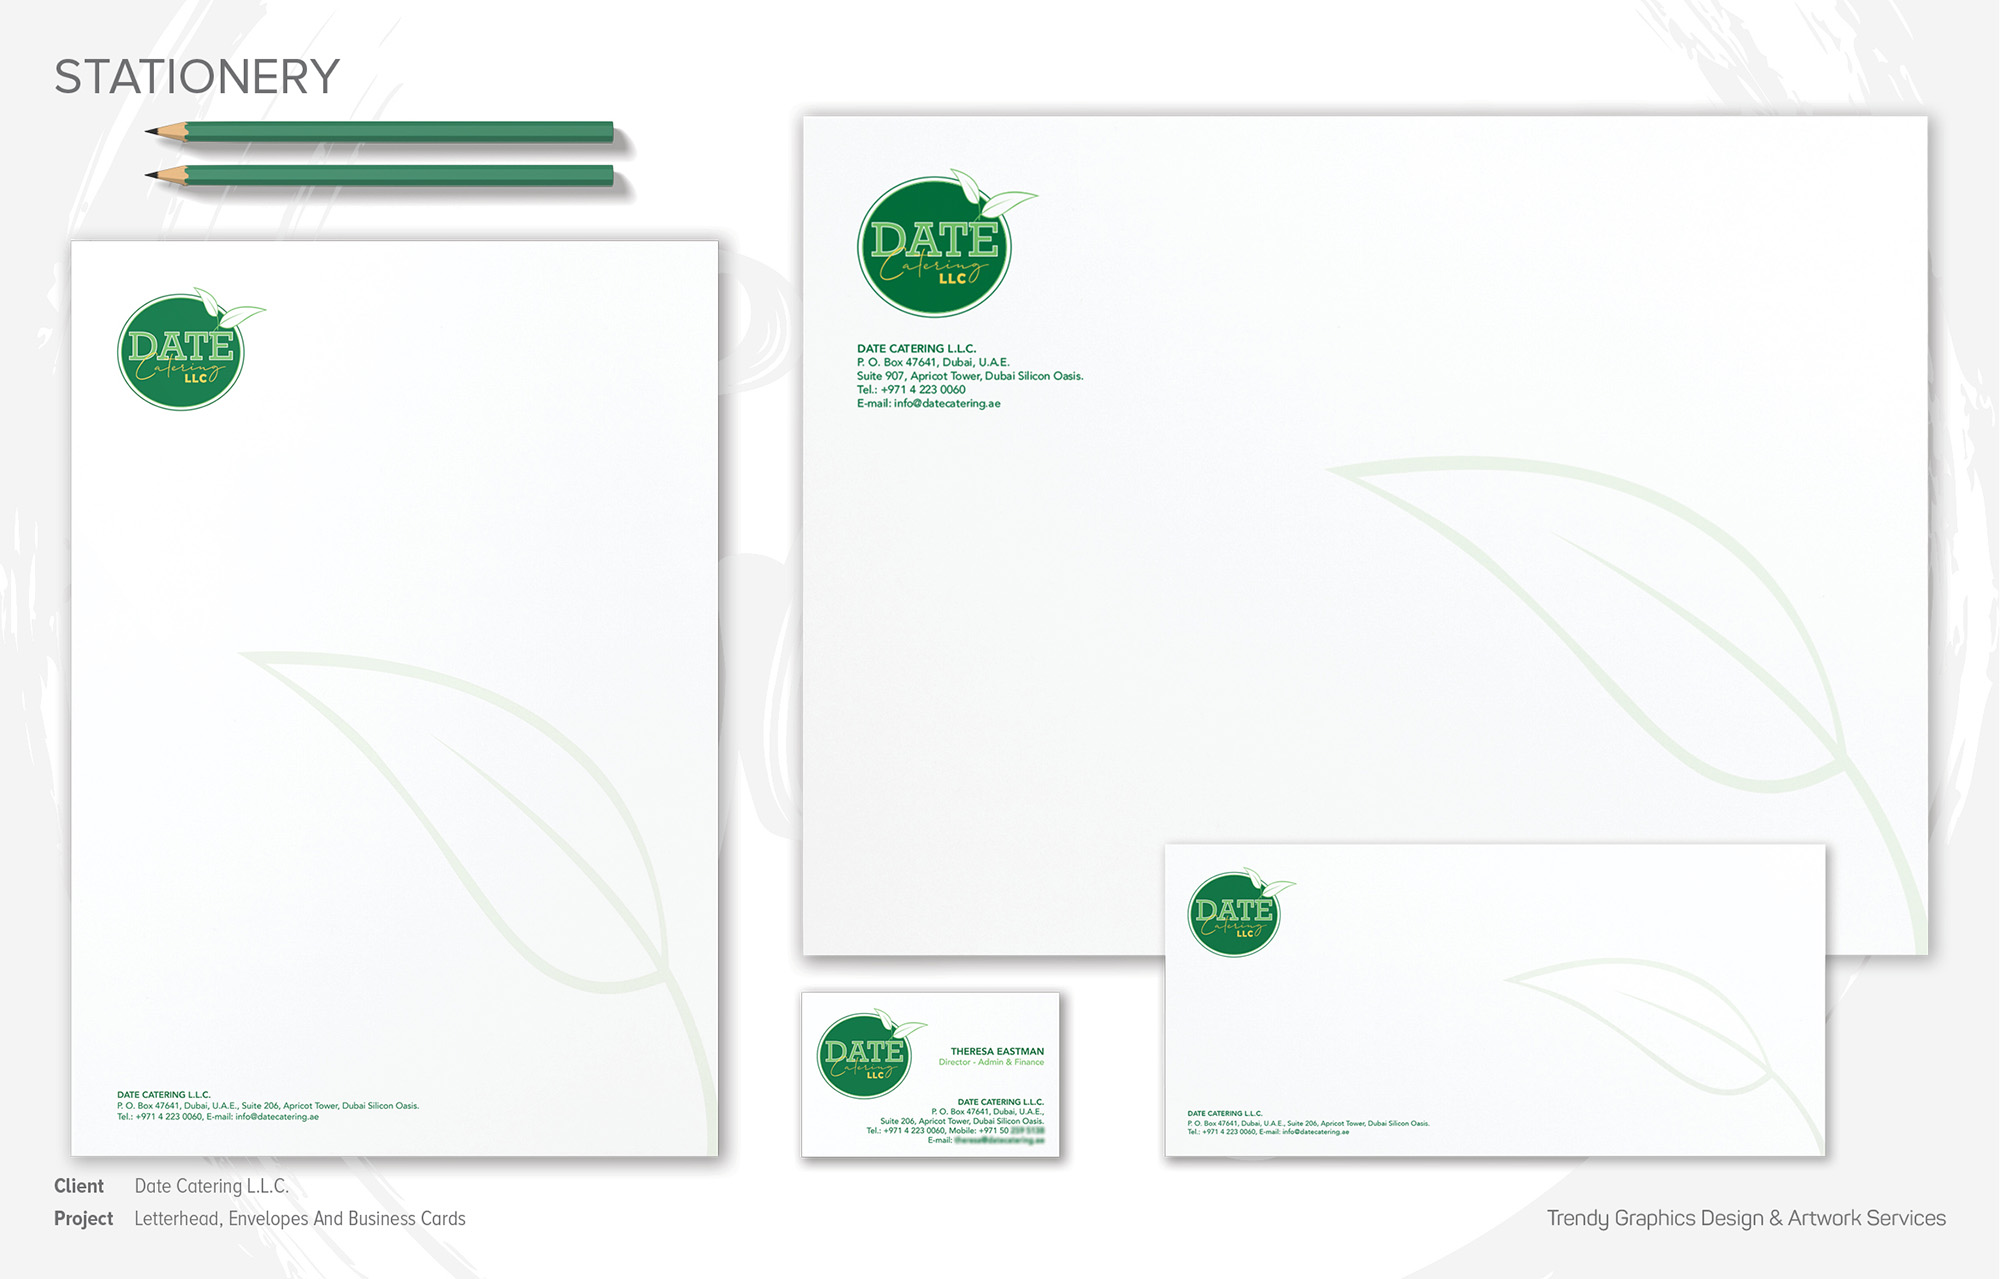 Date Catering Letterhead, Envelopes & Business Cards